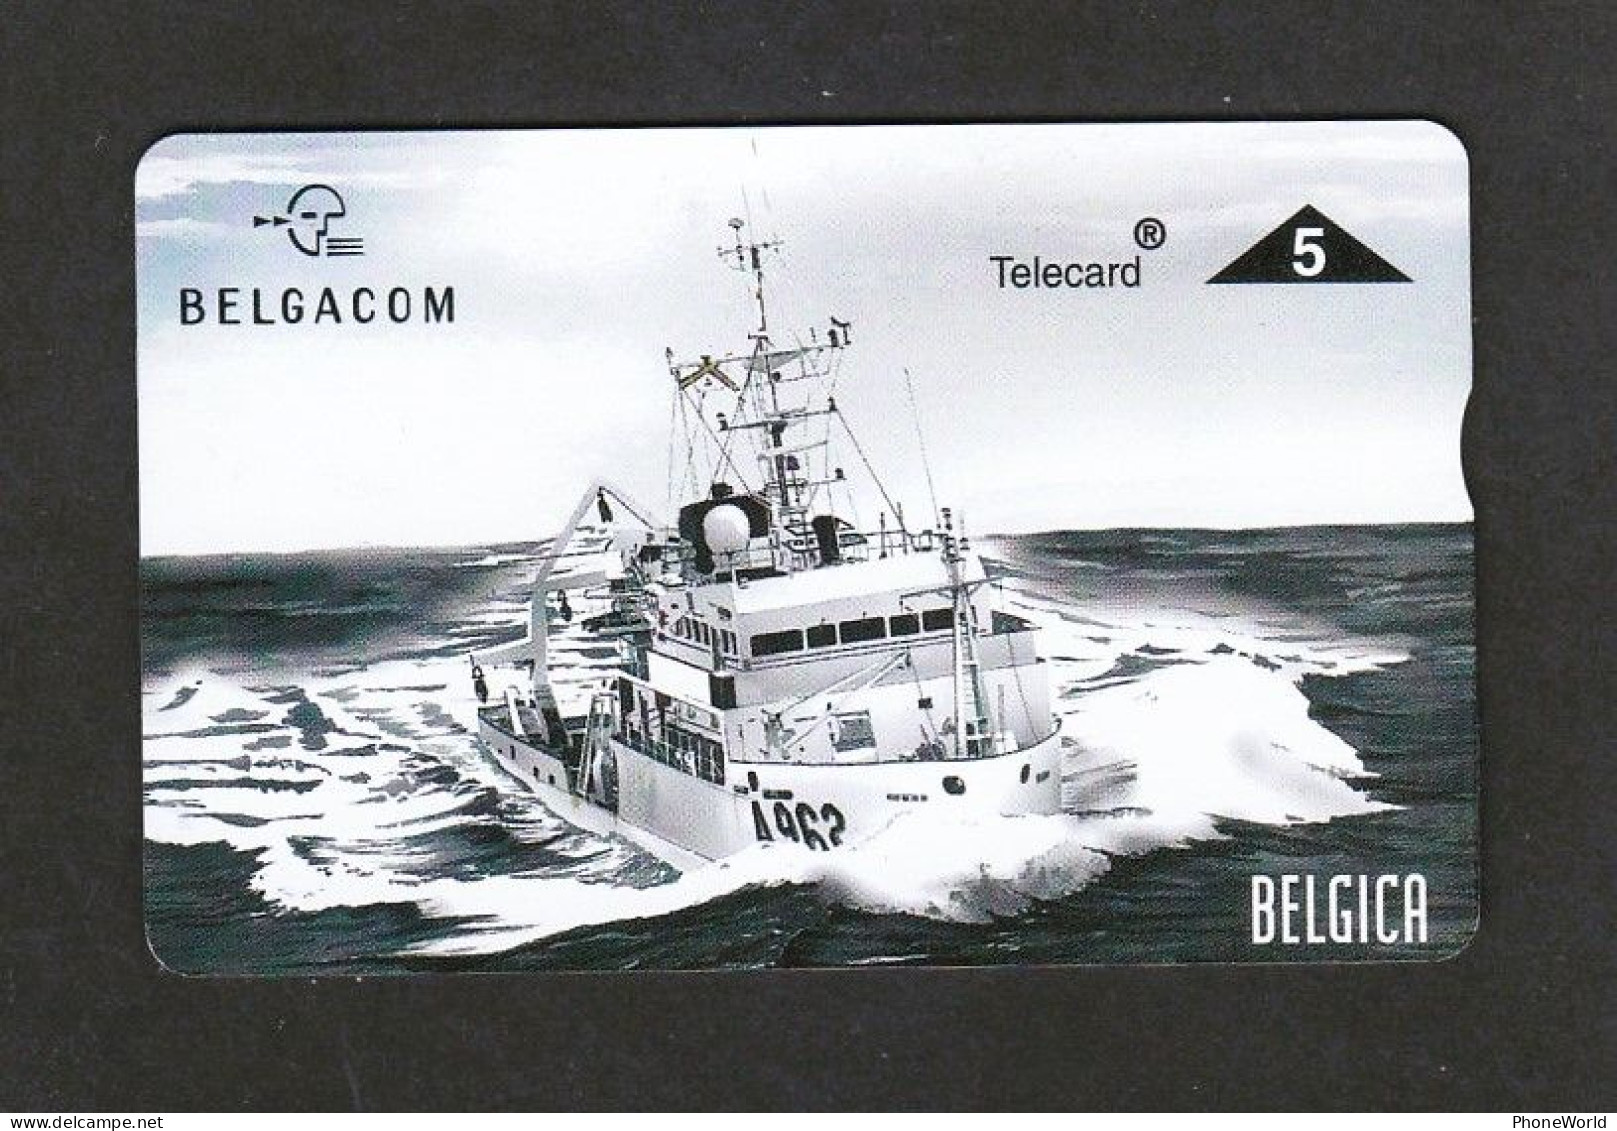 P551 - Belgica 2 - 706 L Mint - Ship - Army - Zonder Chip